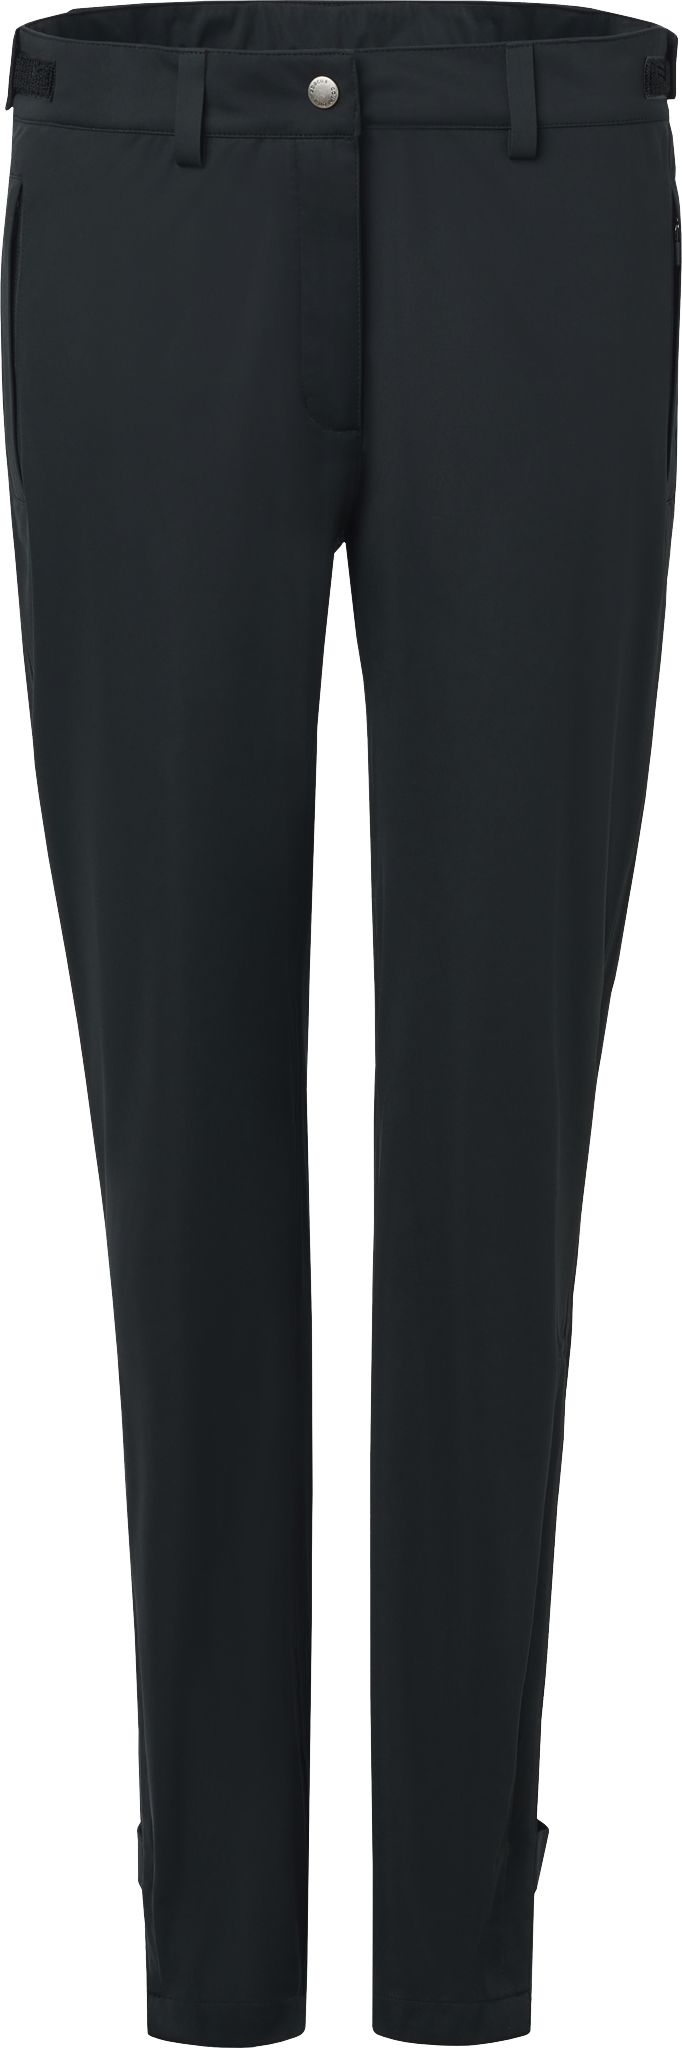 ABACUS, W LDS BOUNCE RAINTROUSERS